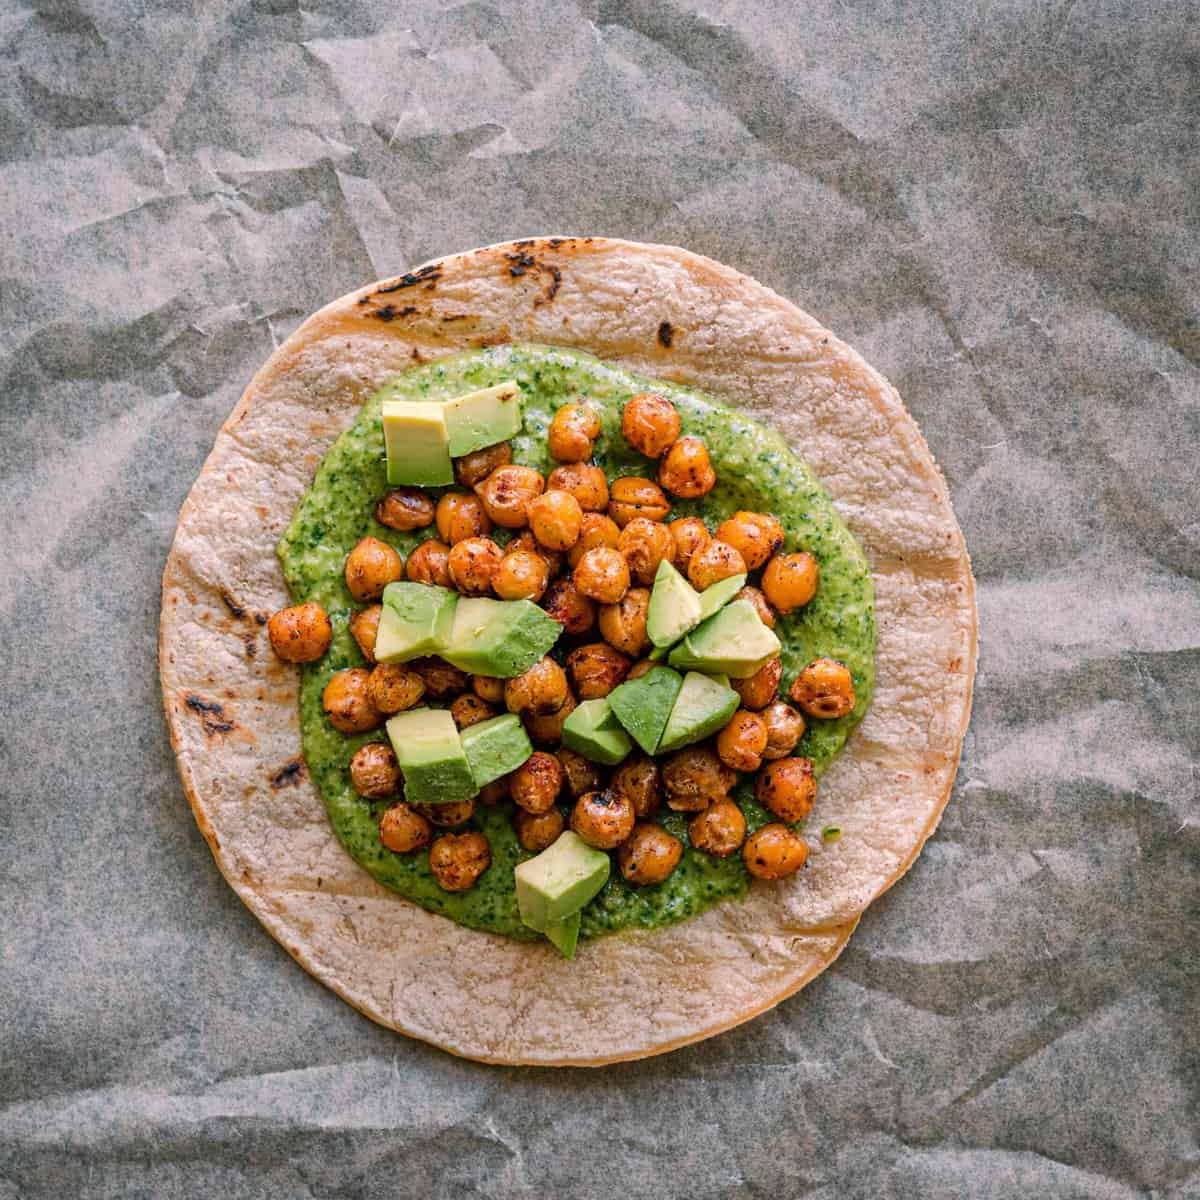 assembling tacos - charred corn tortilla with cilantro pesto, spiced chickpeas, and avocado on top